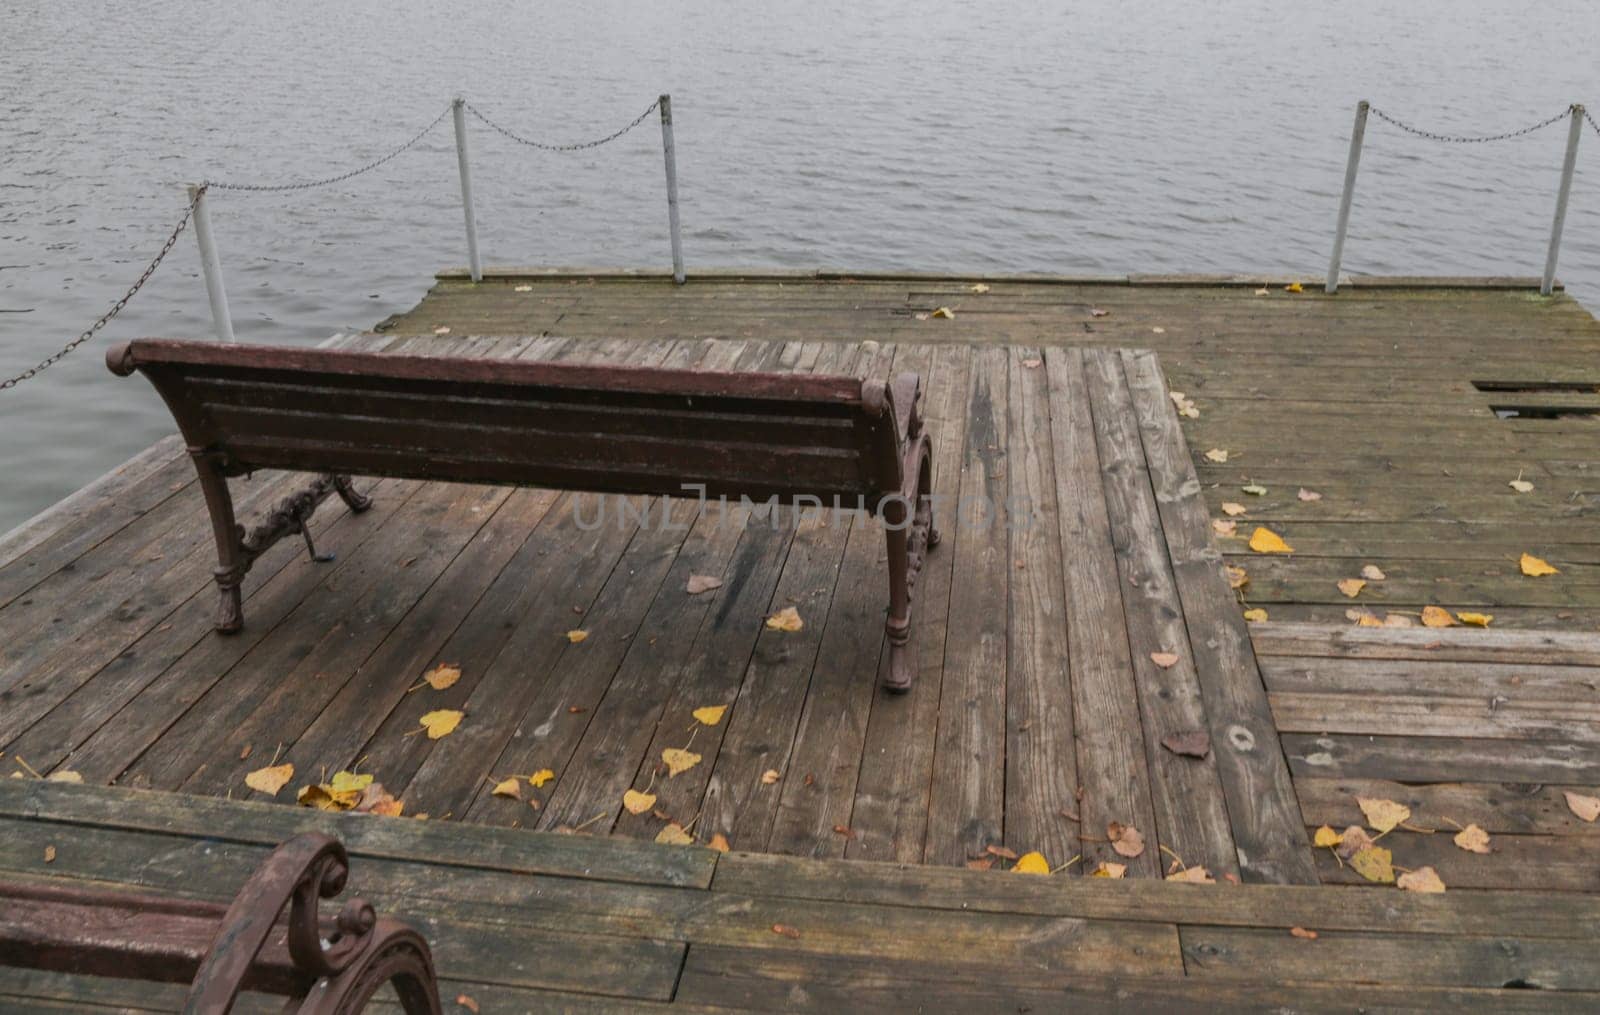 The benches on the wooden village pier. by gelog67